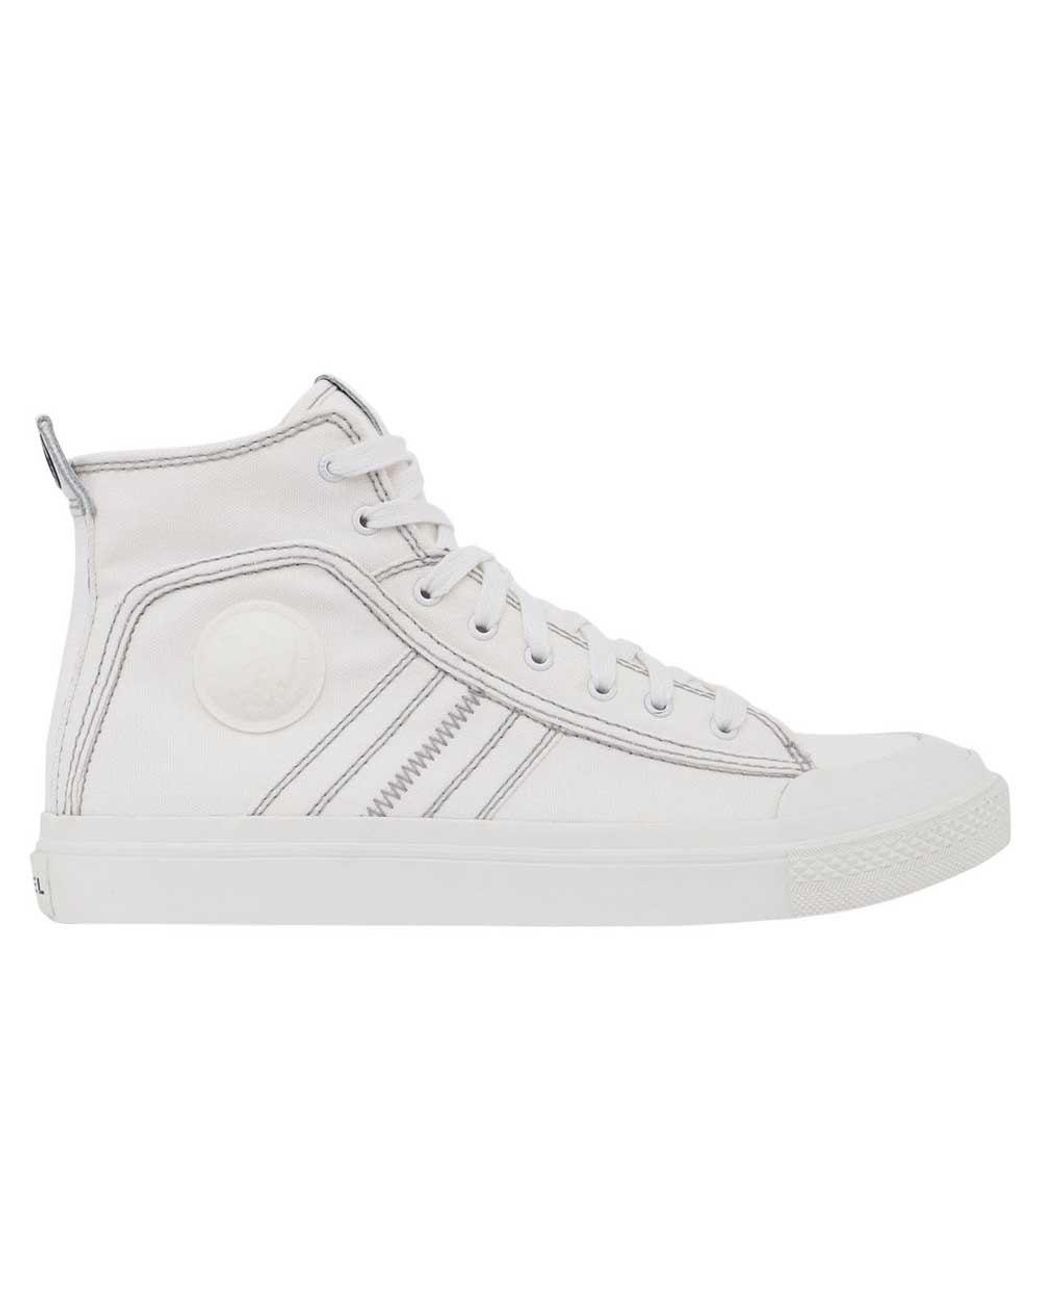 DIESEL S-astico Mid Lace Sneakers in White for Men - Save 11 